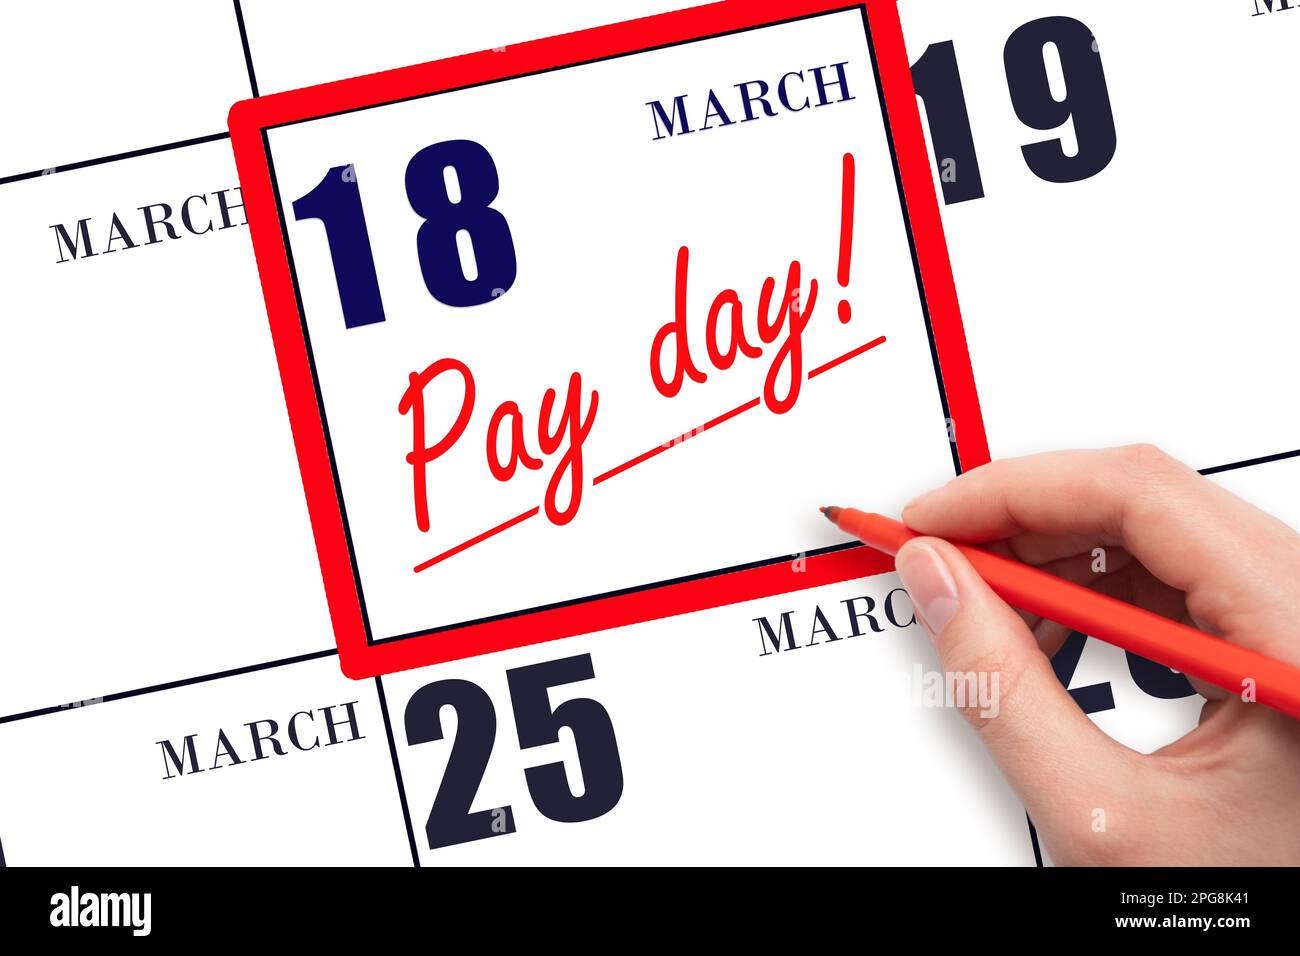 18th day of March. Hand writing text PAY DATE on calendar date March 18 and underline it. Payment due date. Reminder concept of payment. Spring month, Stock Photo